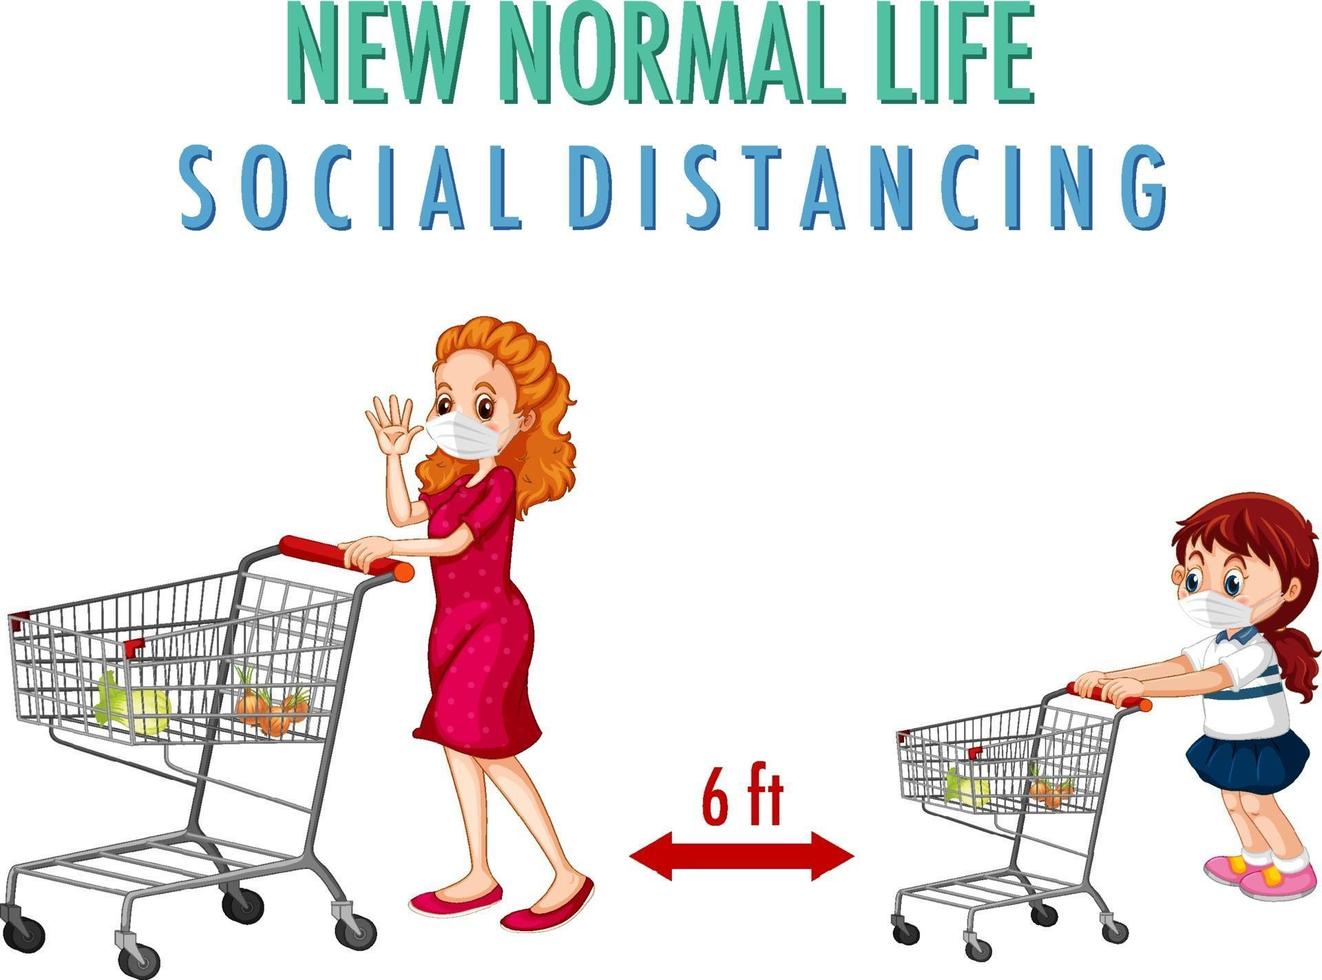 New Normal Life with a woman and a girl push shopping cart vector